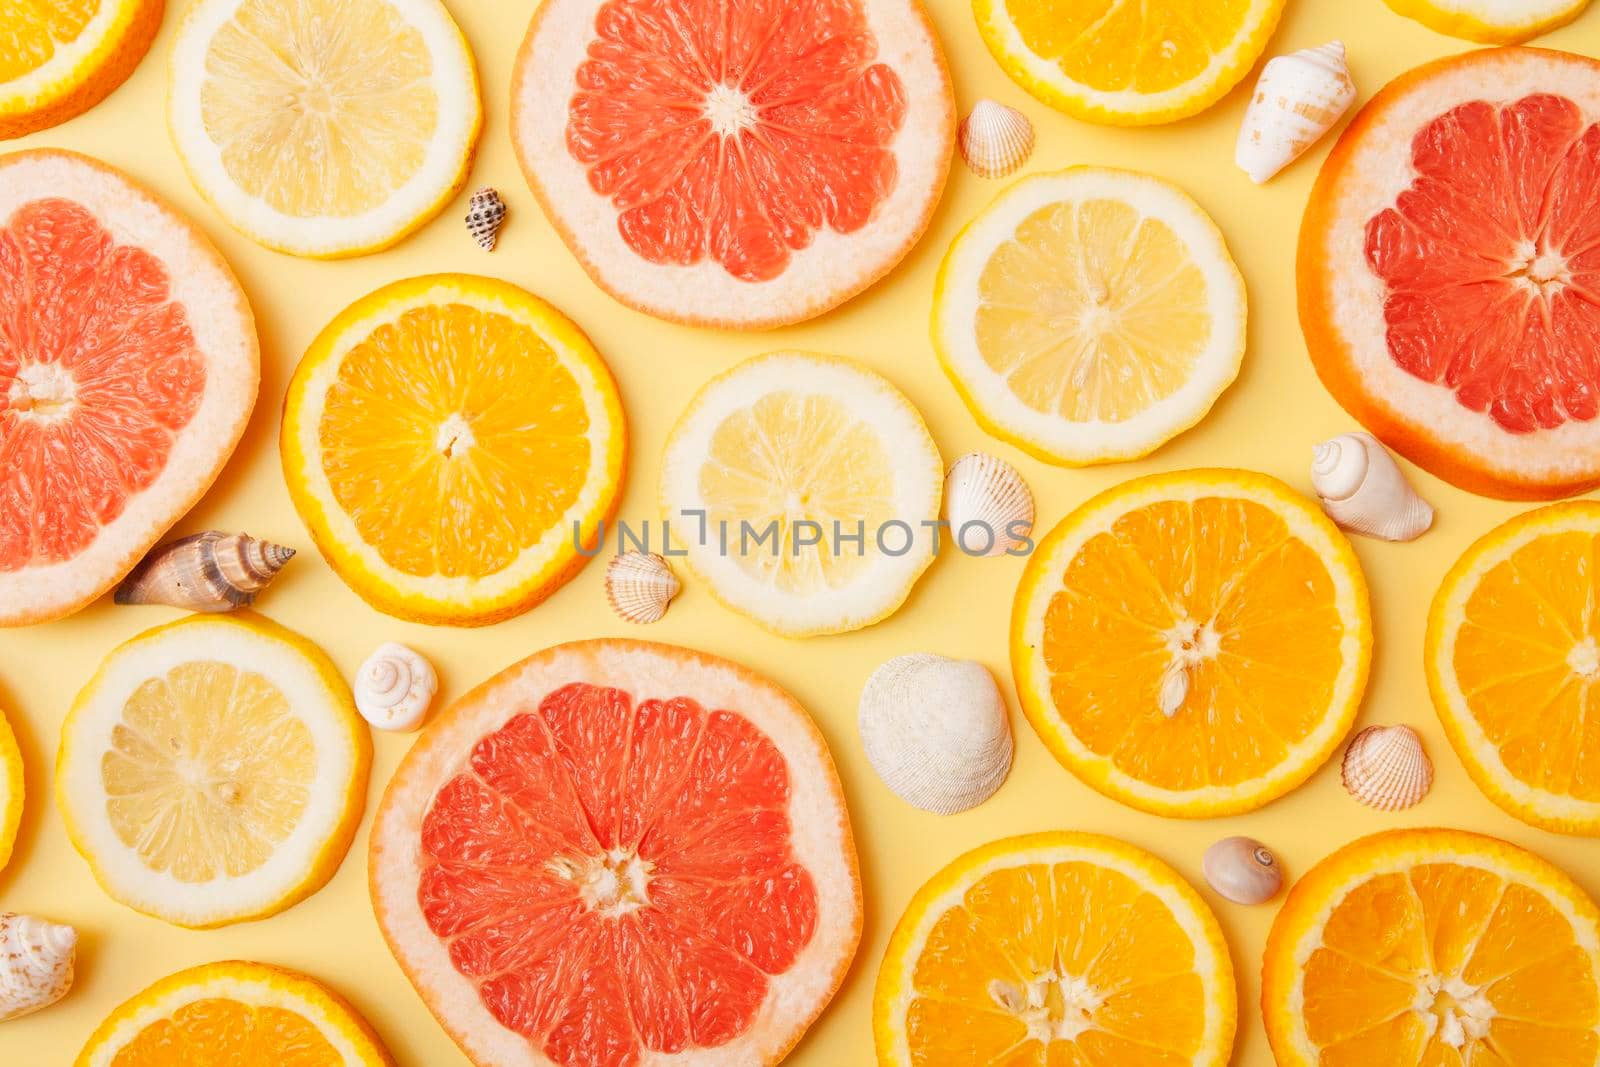 Flat lay slices of orange, grapefruit and lemon with shells on a yellow background. Summer citrus pattern by ssvimaliss